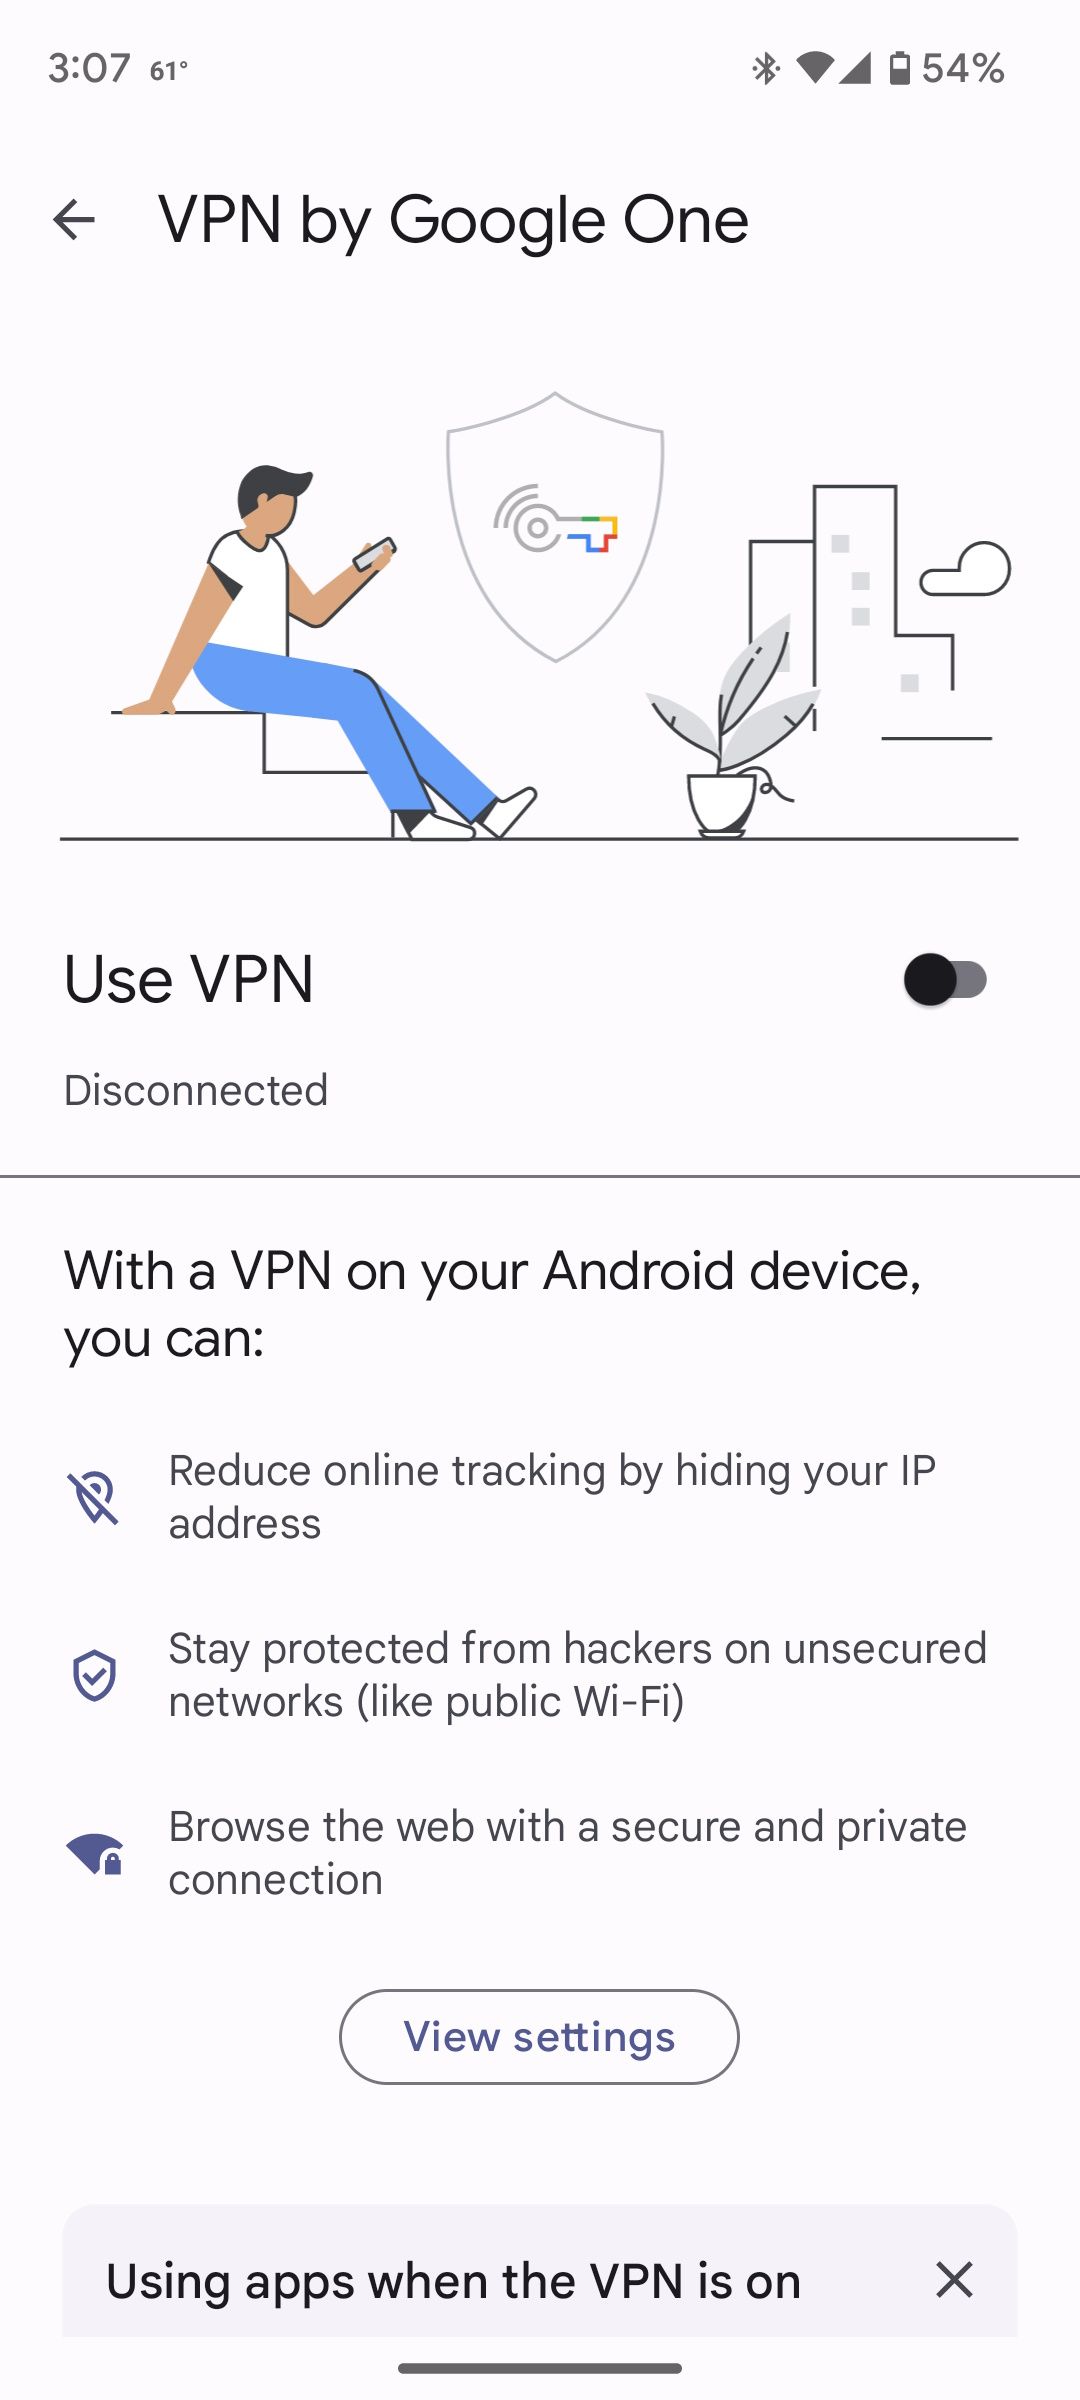 The main screen in VPN by Google One